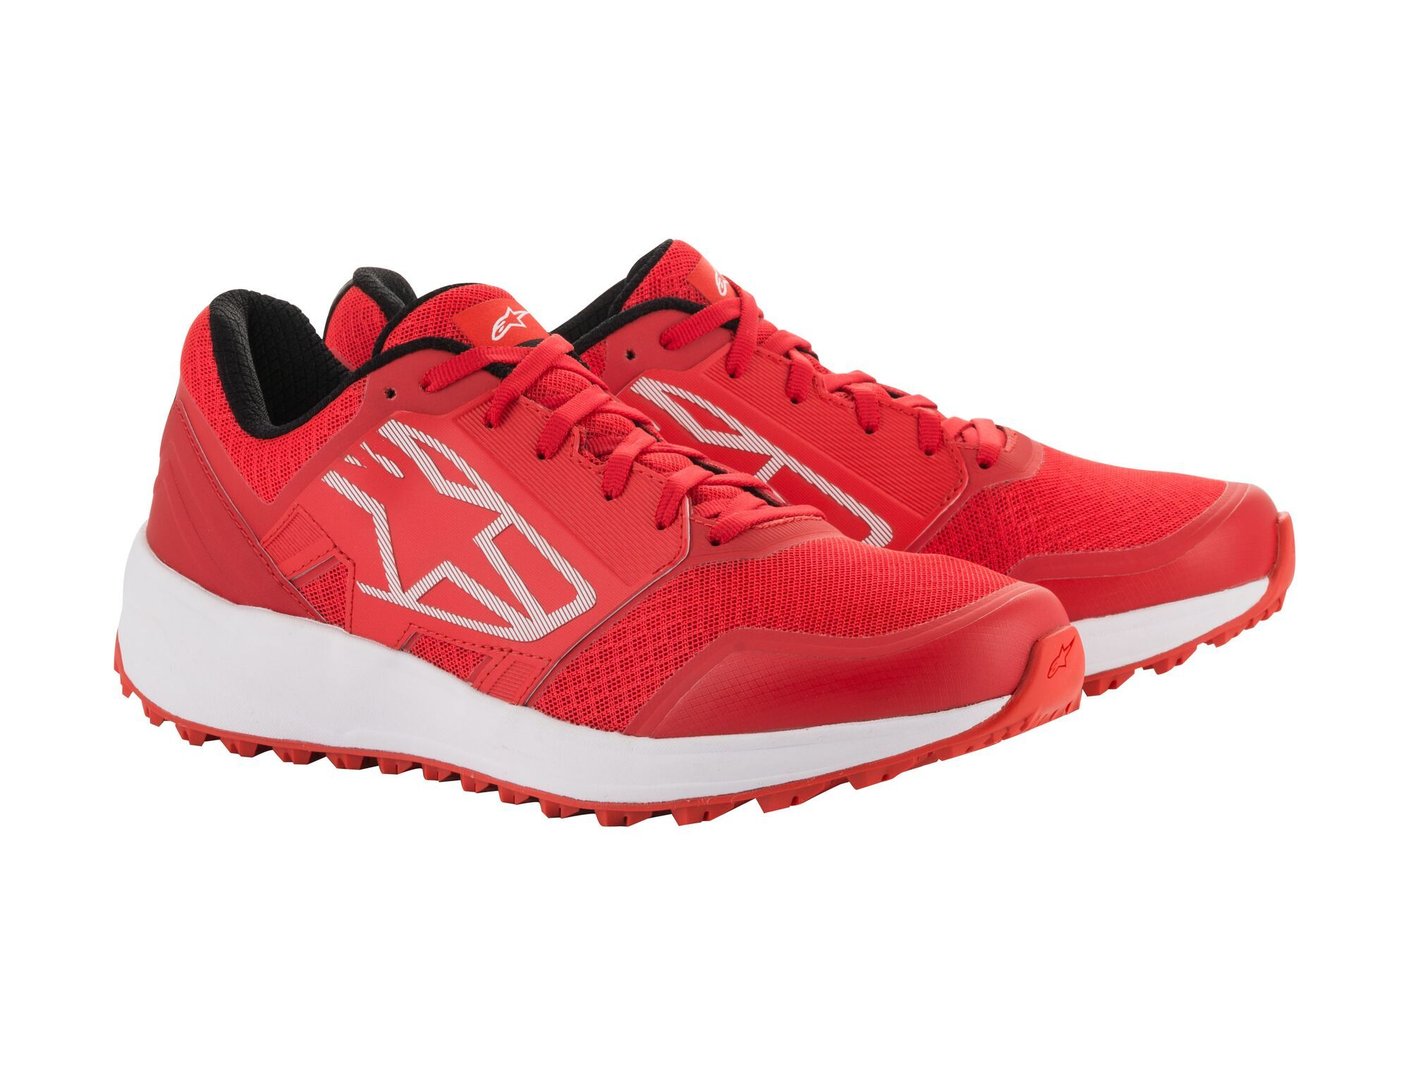 ALPINESTARS 2654820_32_8 META TRAIL RUNNING shoes, red/white, size 40,5 (8) (Фото-1)